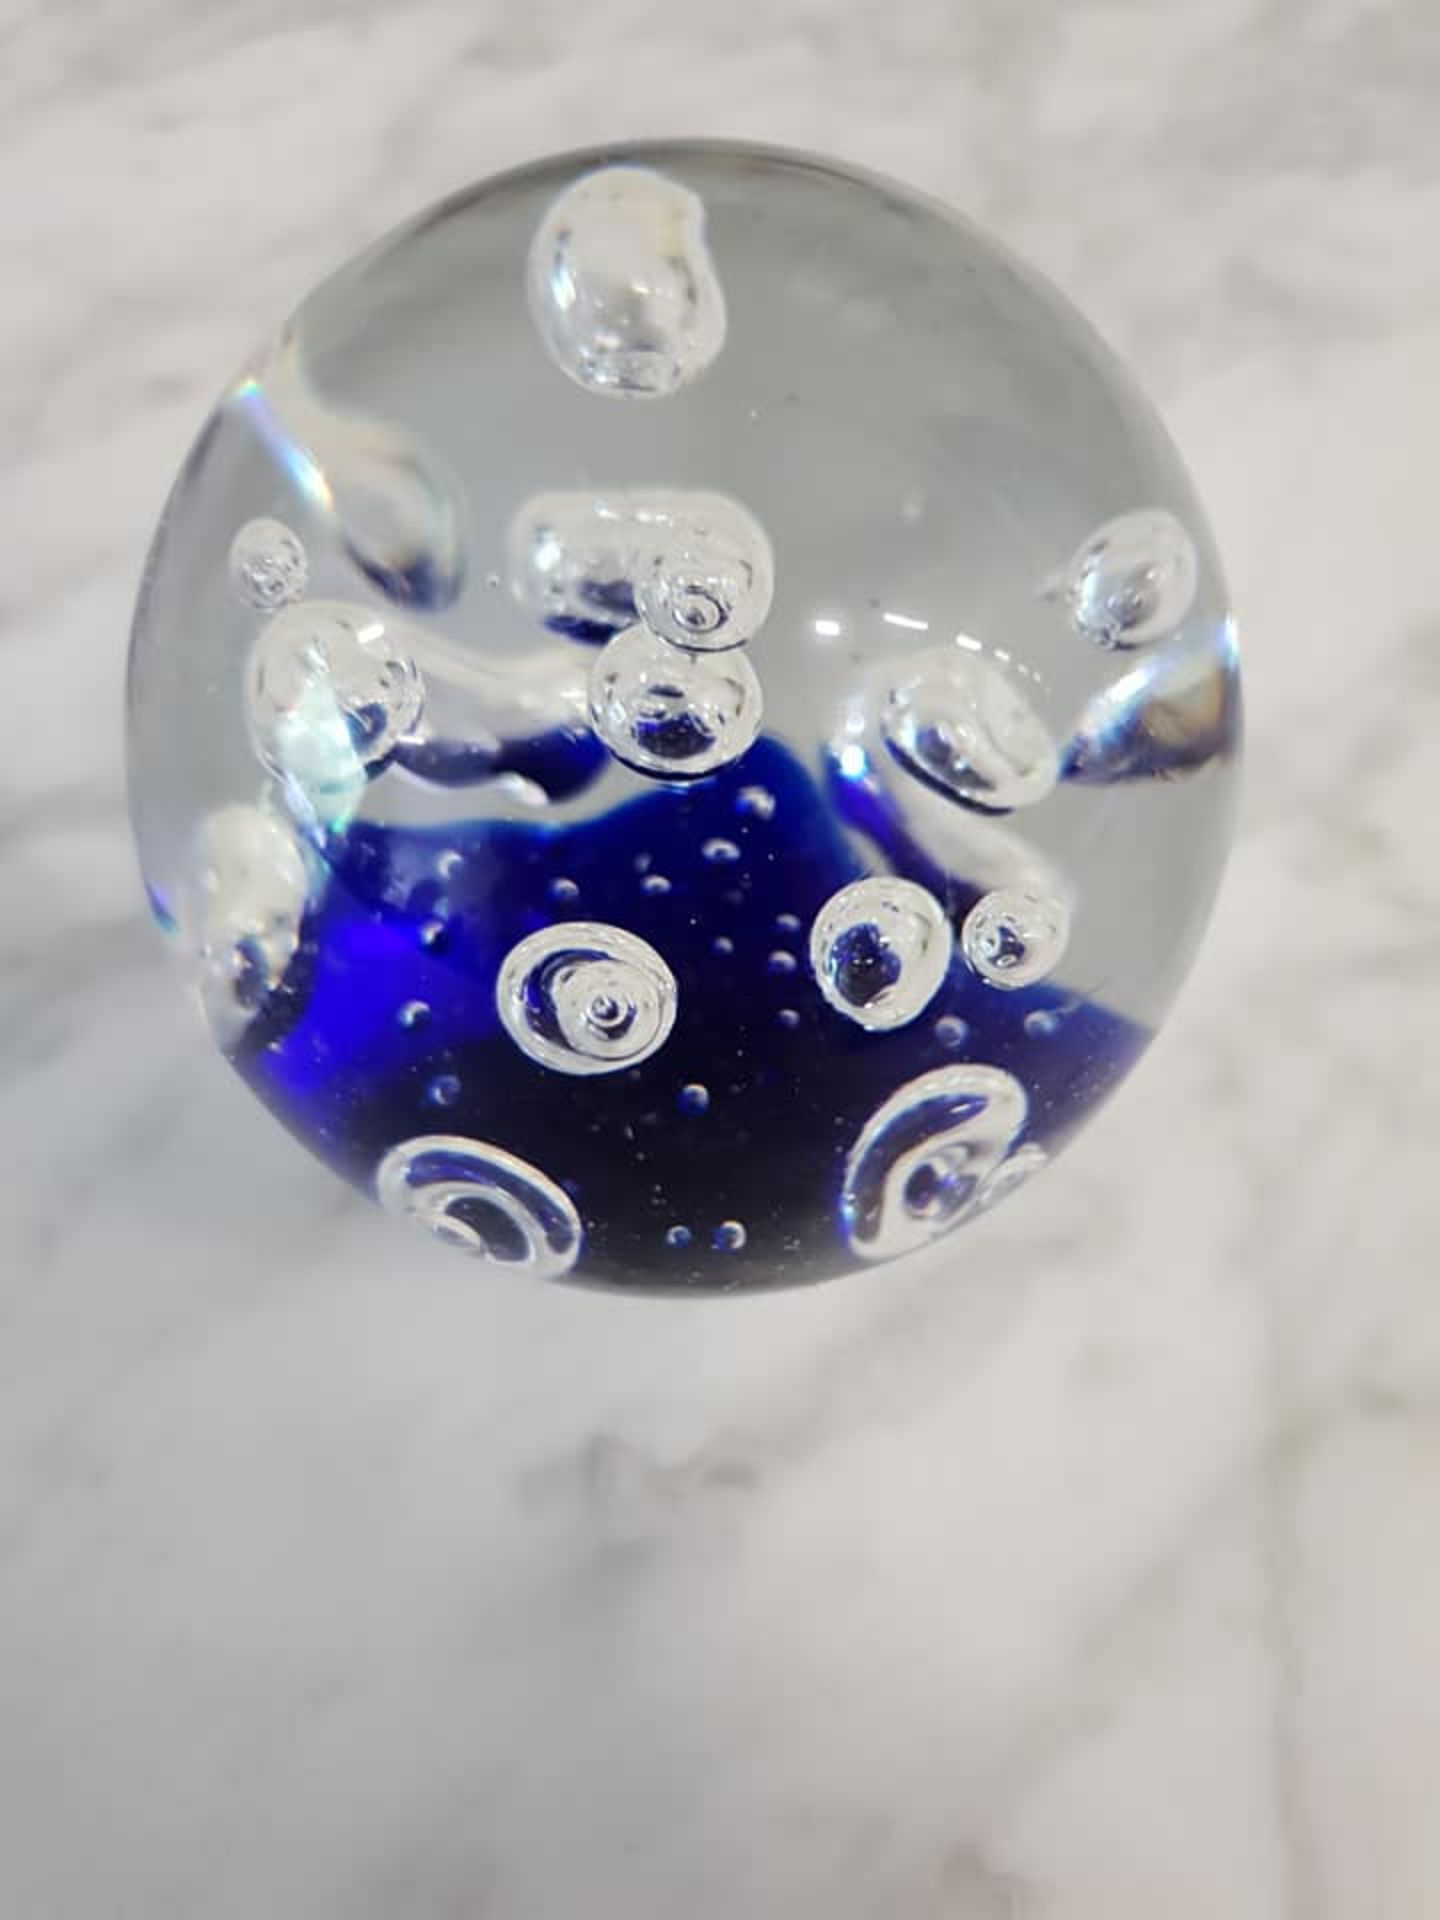 Bohemian blown art glass sphere paperweight 7cm dark navy blue middle with controlled bubbles